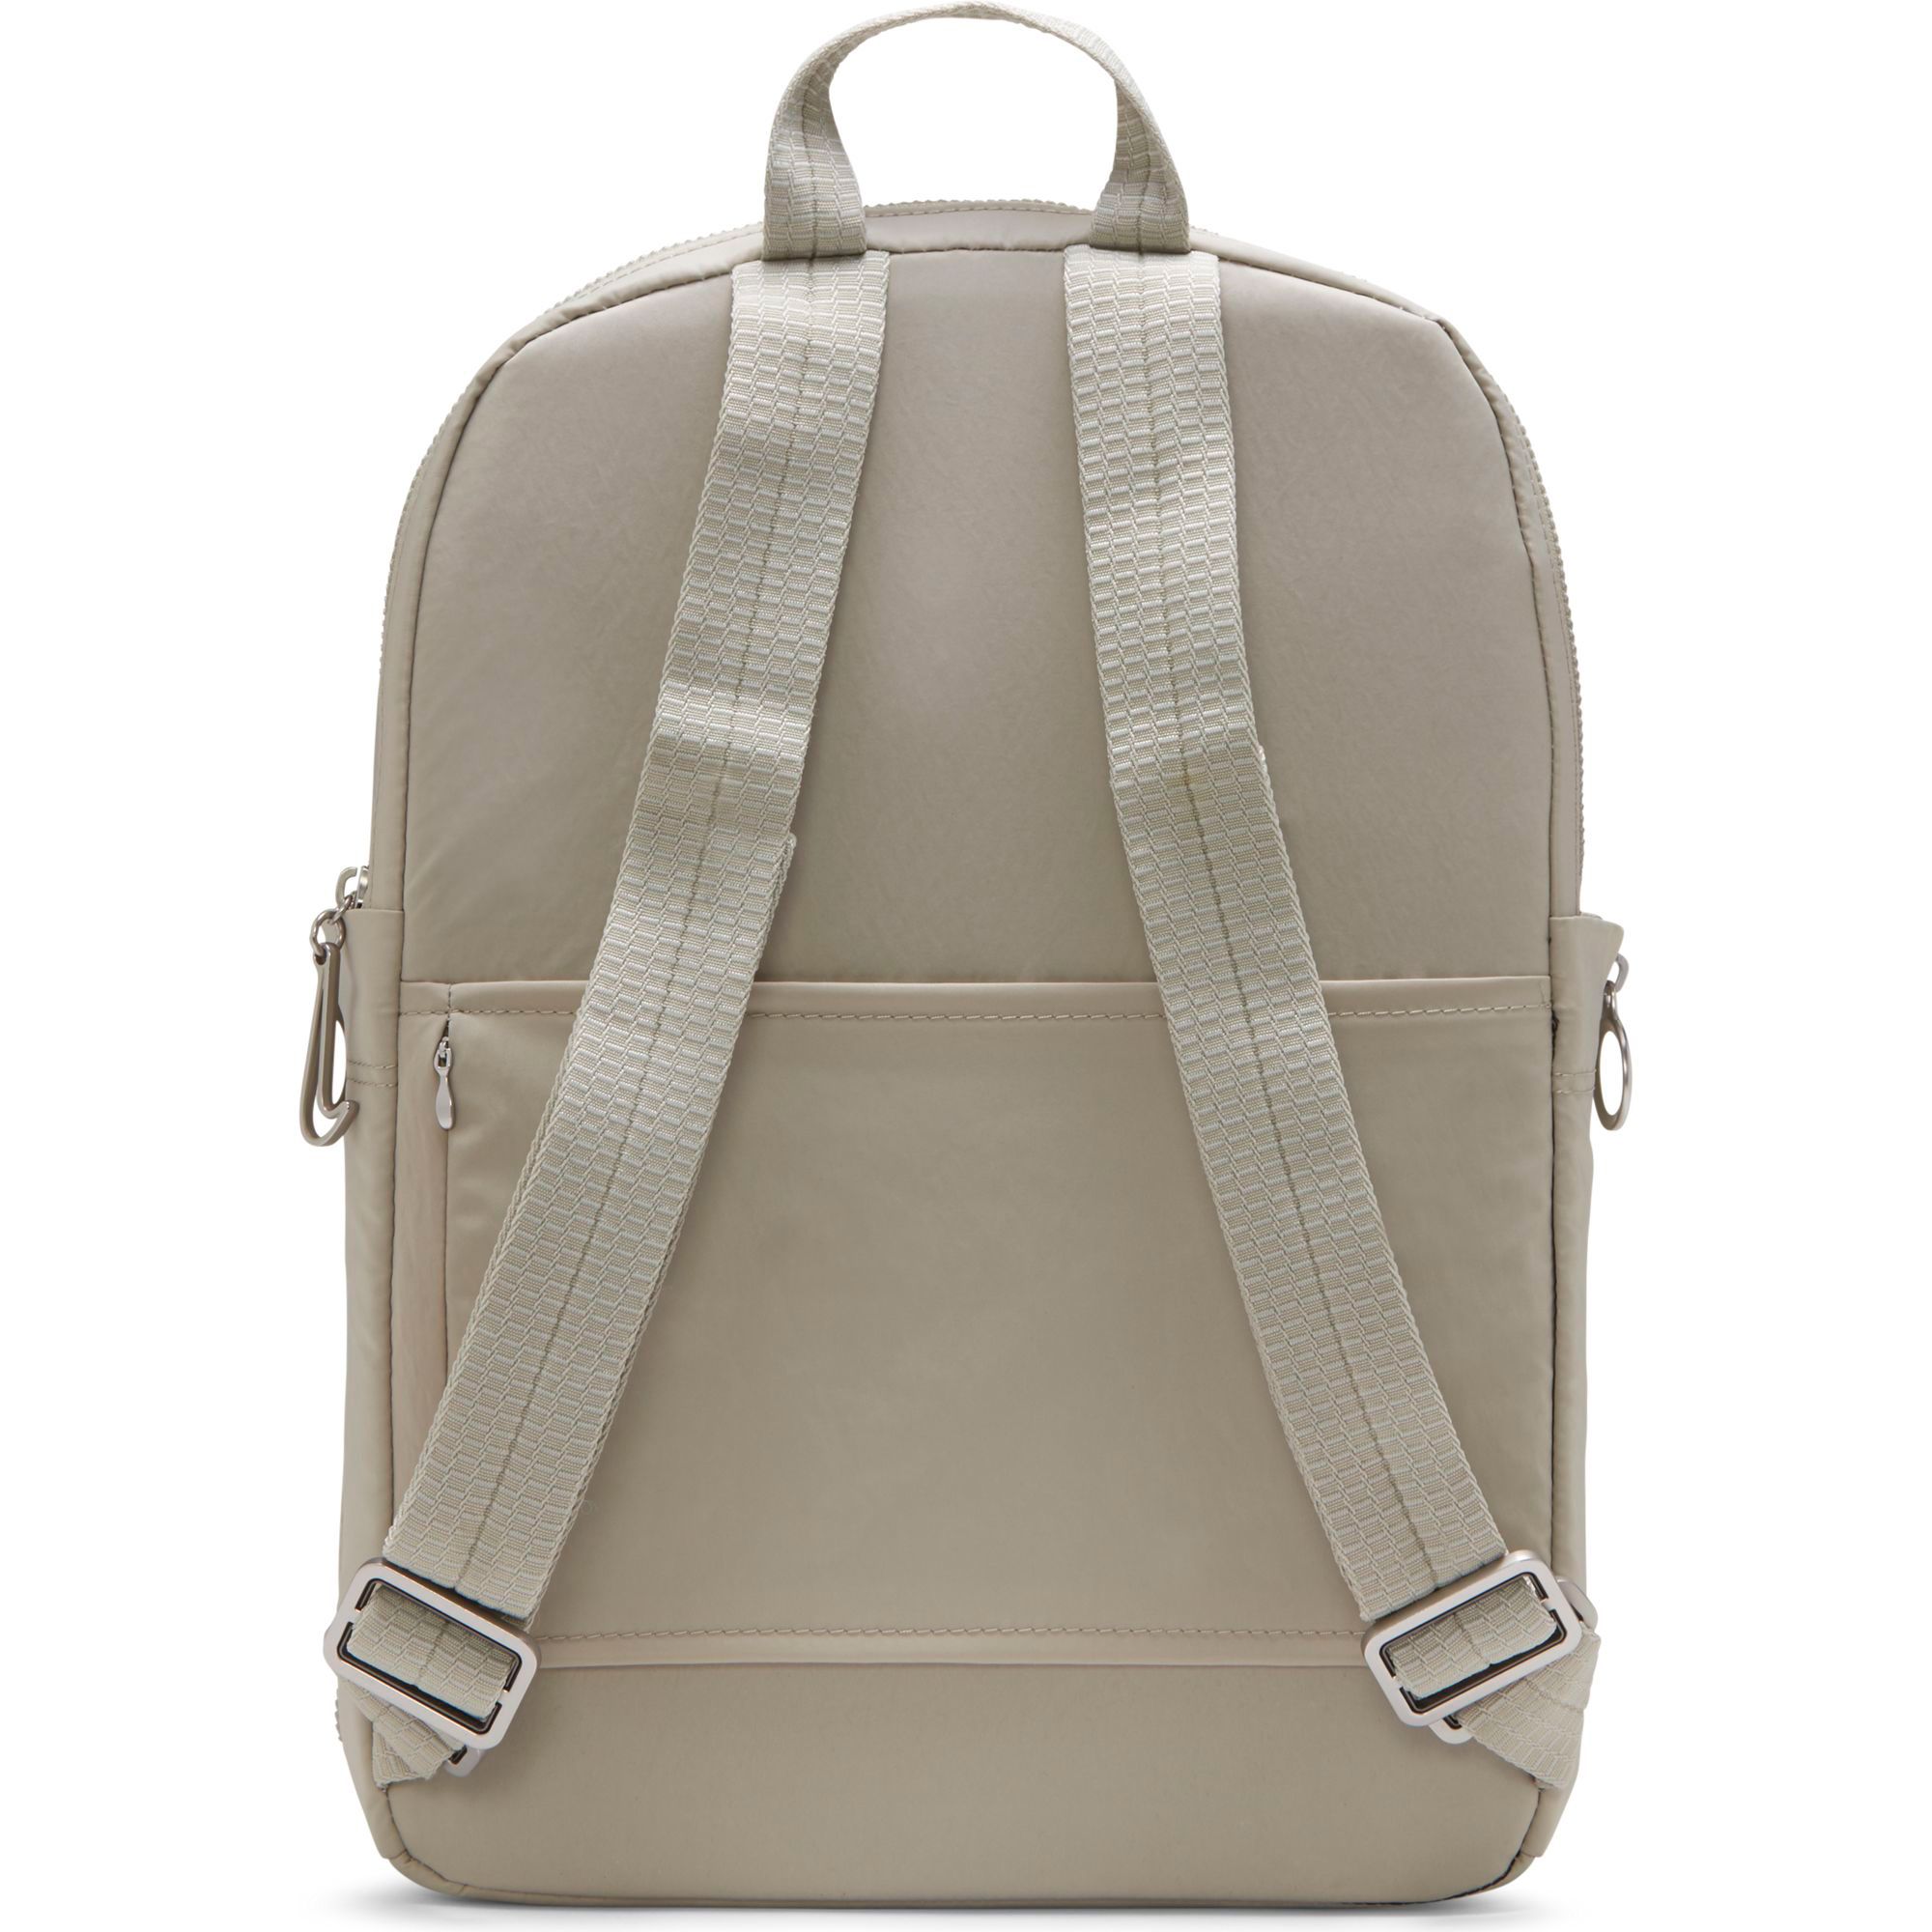 Nike Women's One Luxe Backpack